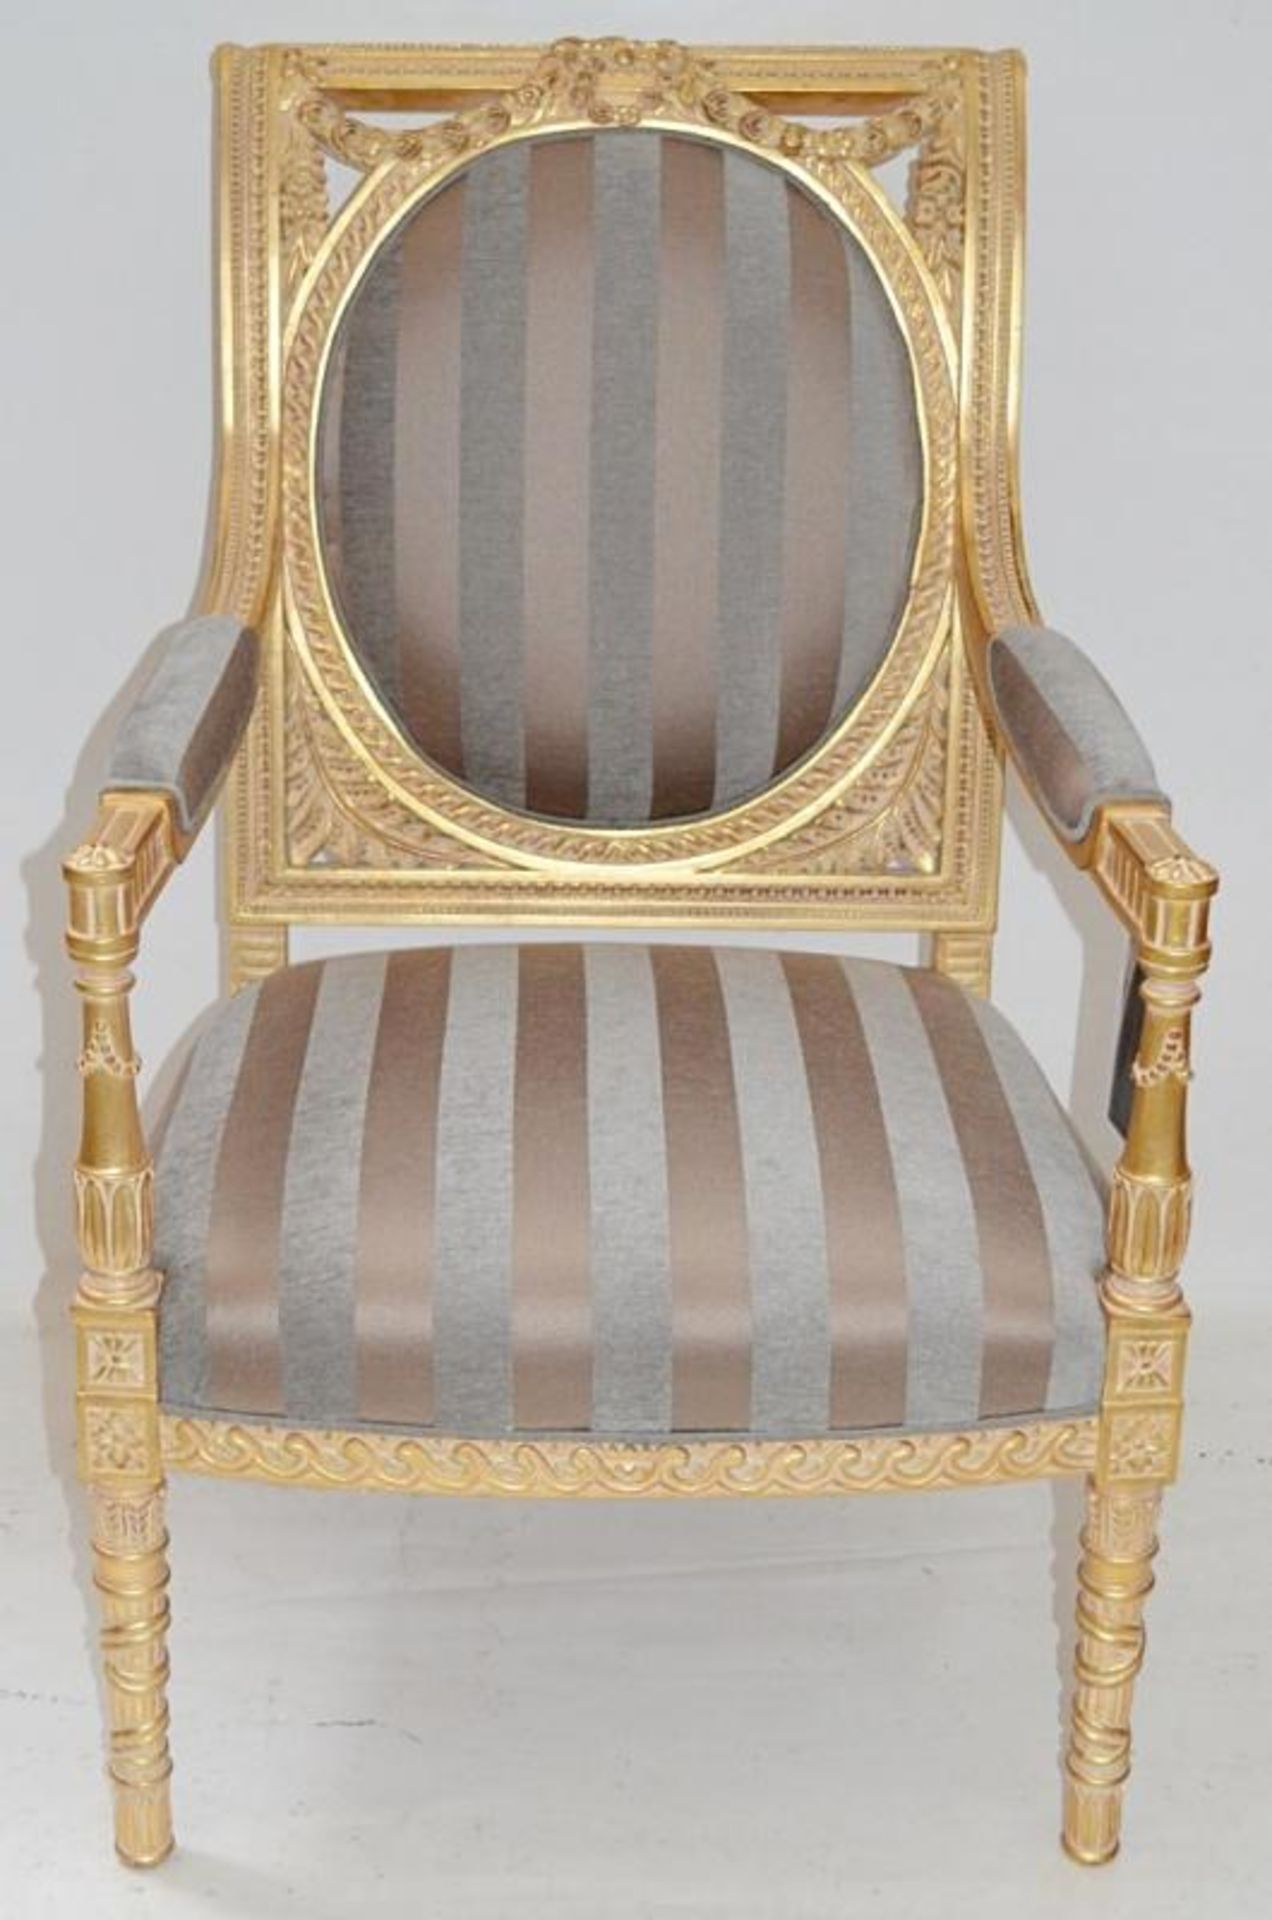 1 x DURESTA Flavia Chair - Features A Hand-Carved Hard Wood Frame With Hand-Stitched Coil Sprung Sea - Bild 7 aus 16